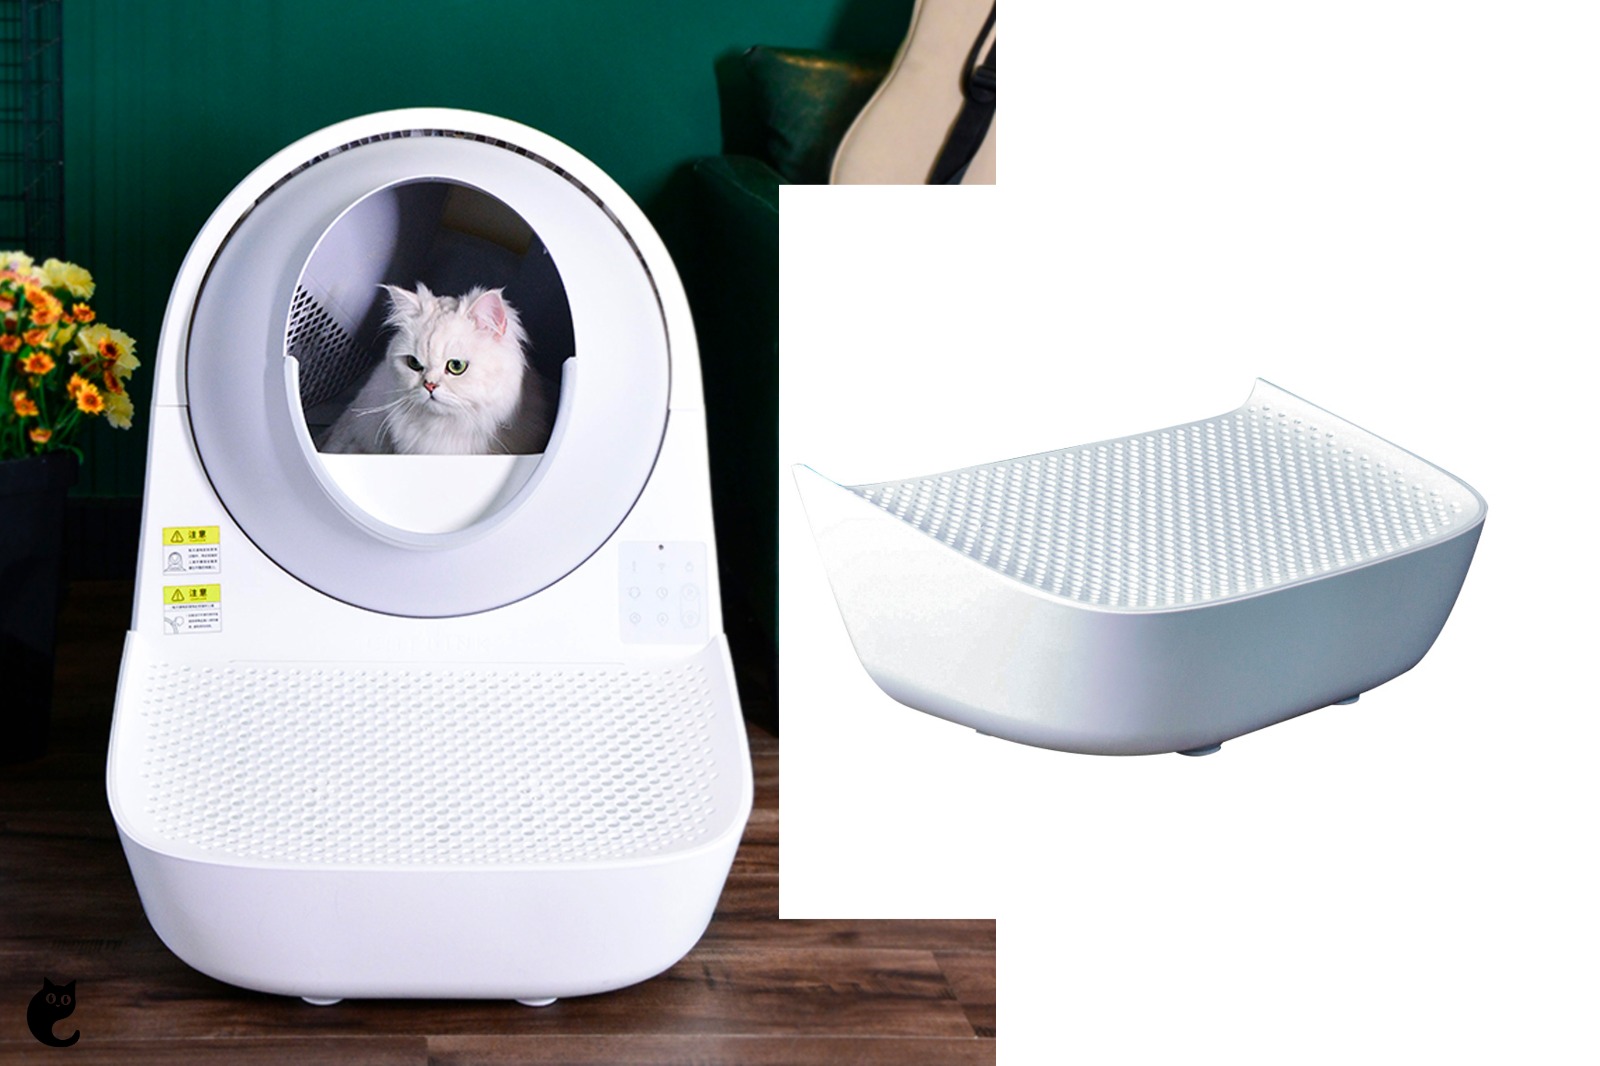 You can even get this Catlink Young Automatic Cat Litter Stairway to assist you in resolving the issue of litter spilling and tracking from the litter box to the floors and around your home.